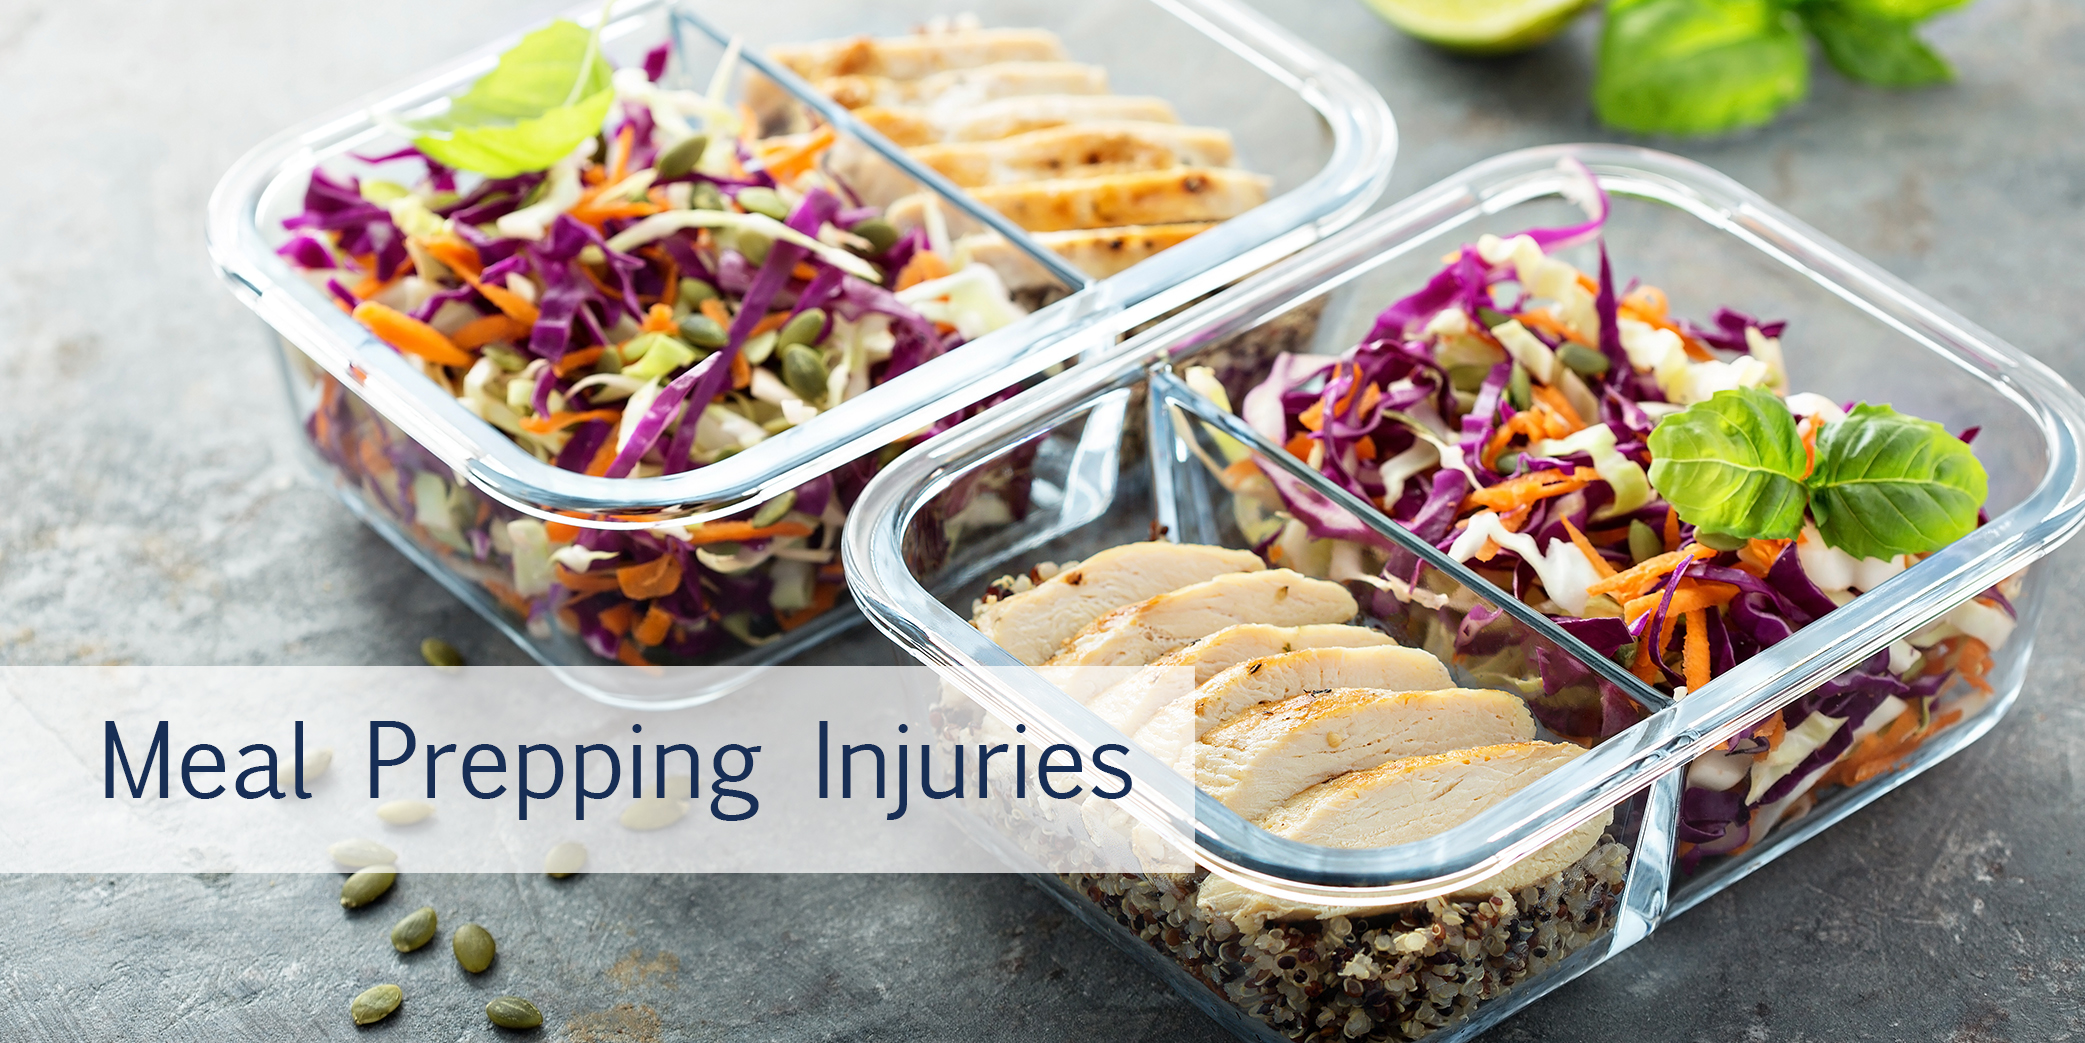 Avoiding Accidents and Injuries While Preparing Holiday Meals